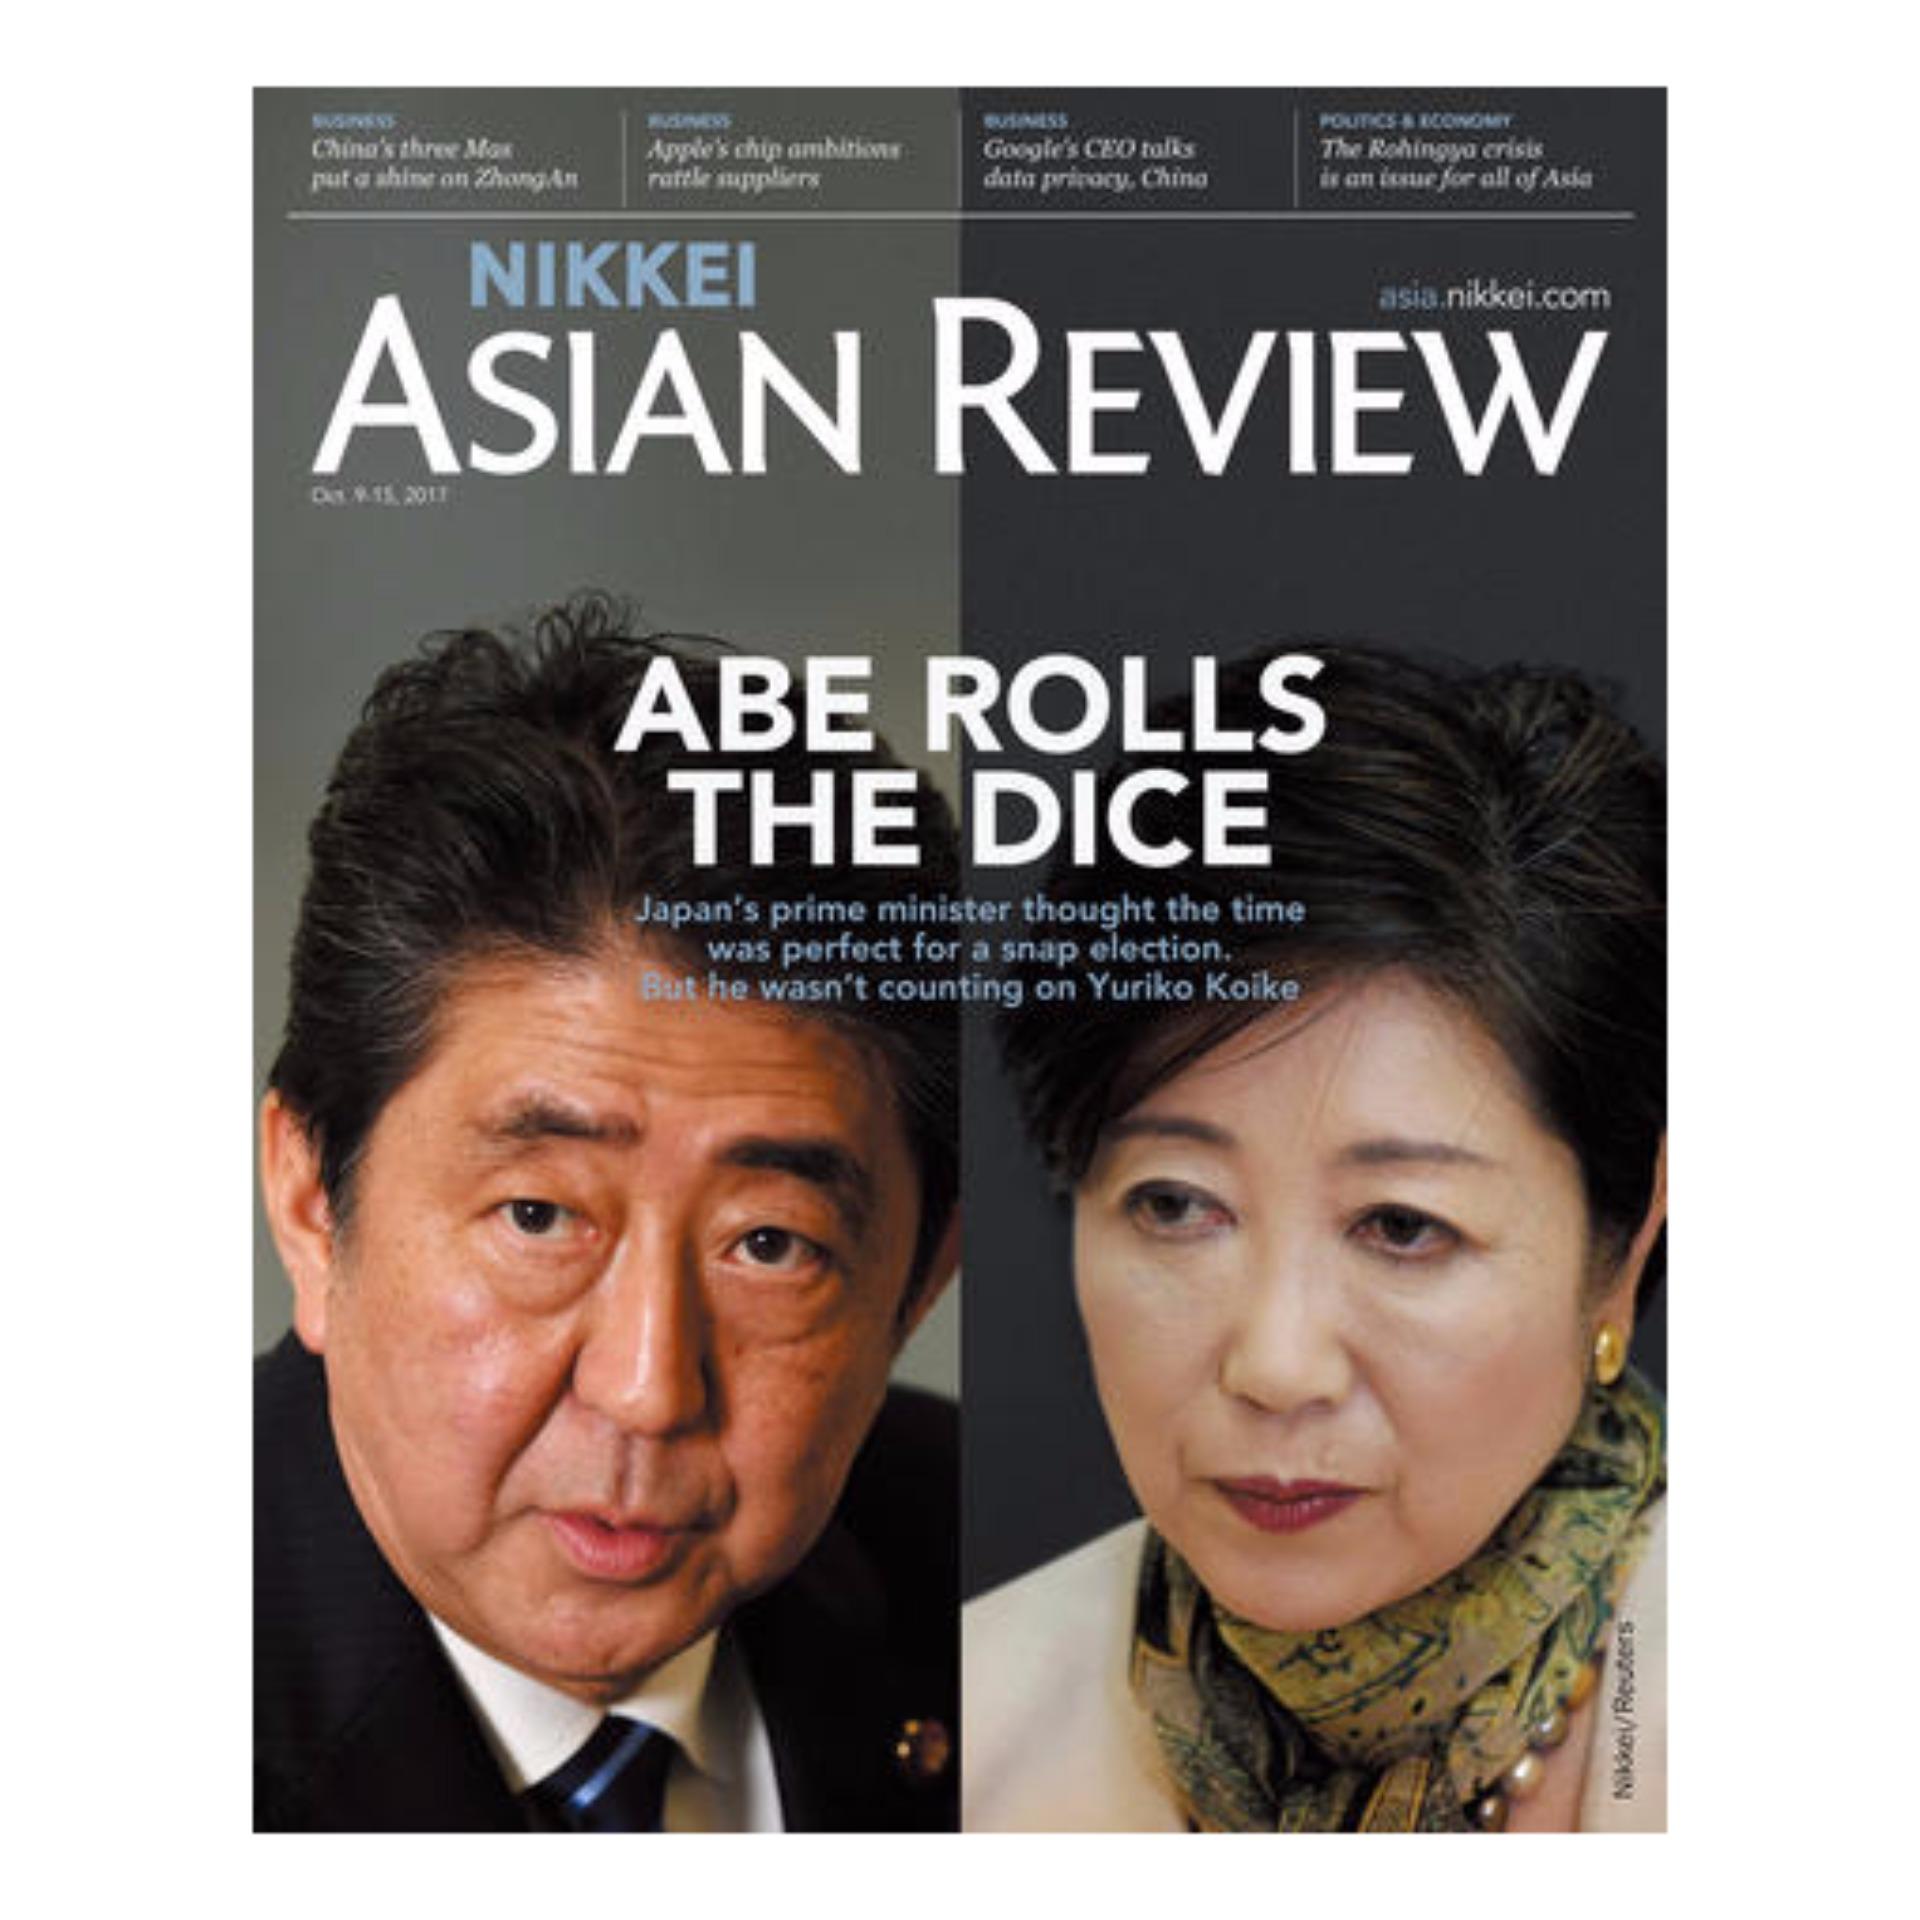 Nikkei Asian Review: ABE ROLLS THE DICE